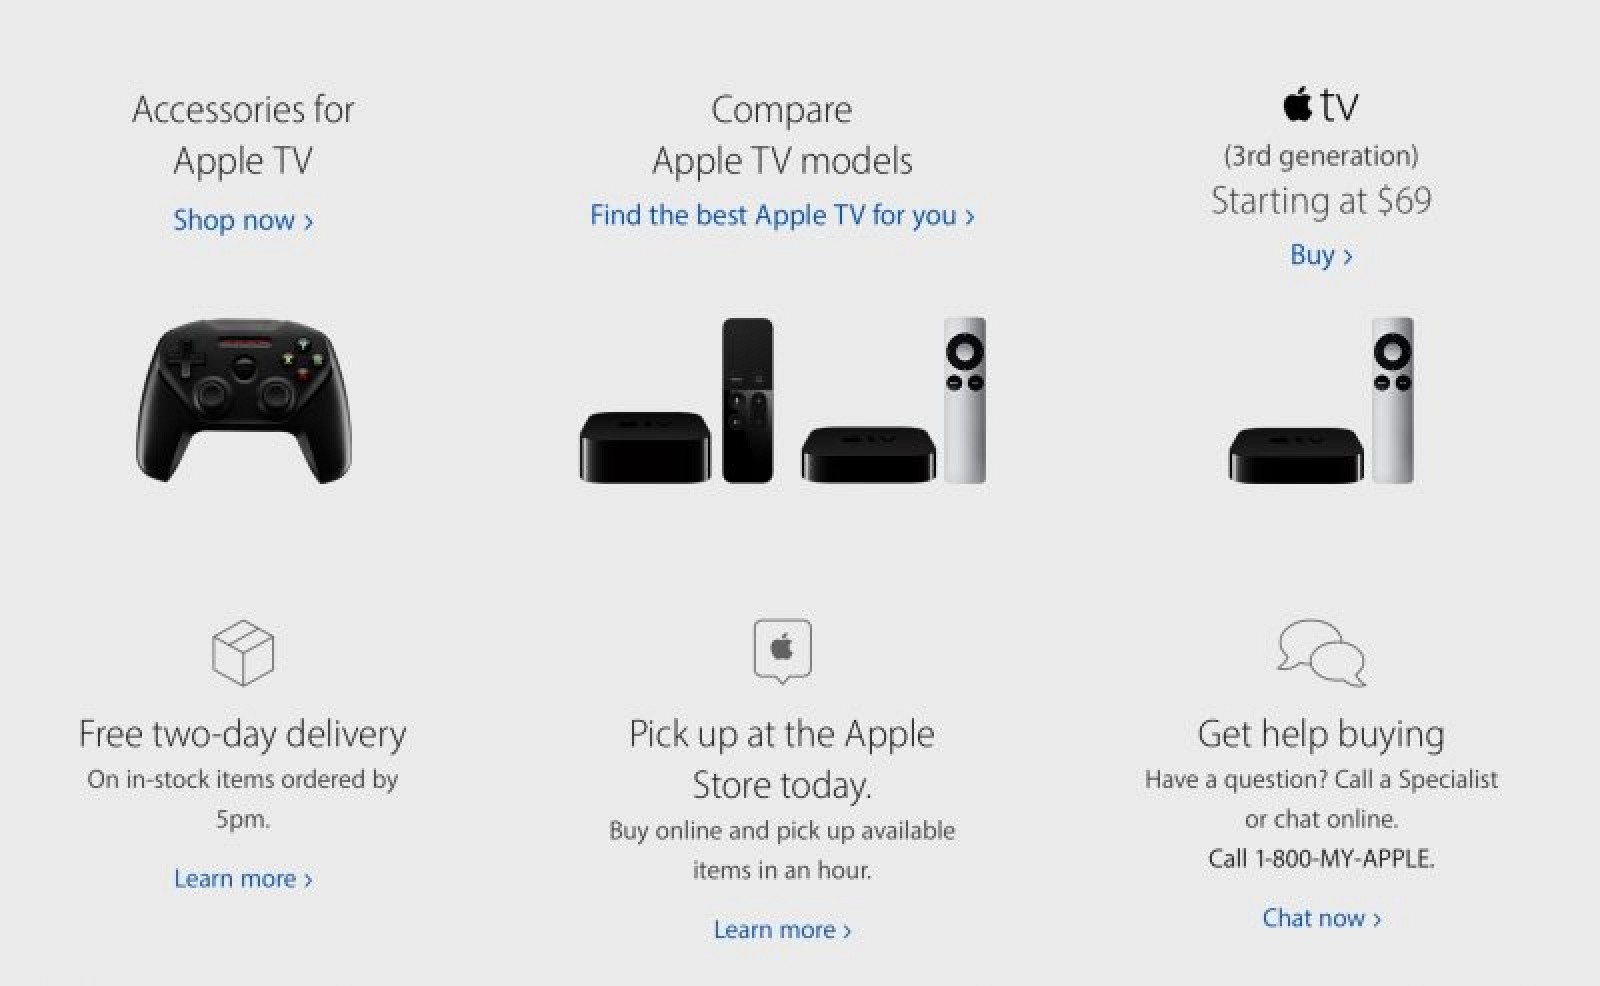 Apple Said to be Phasing Out Third-Generation Apple TV